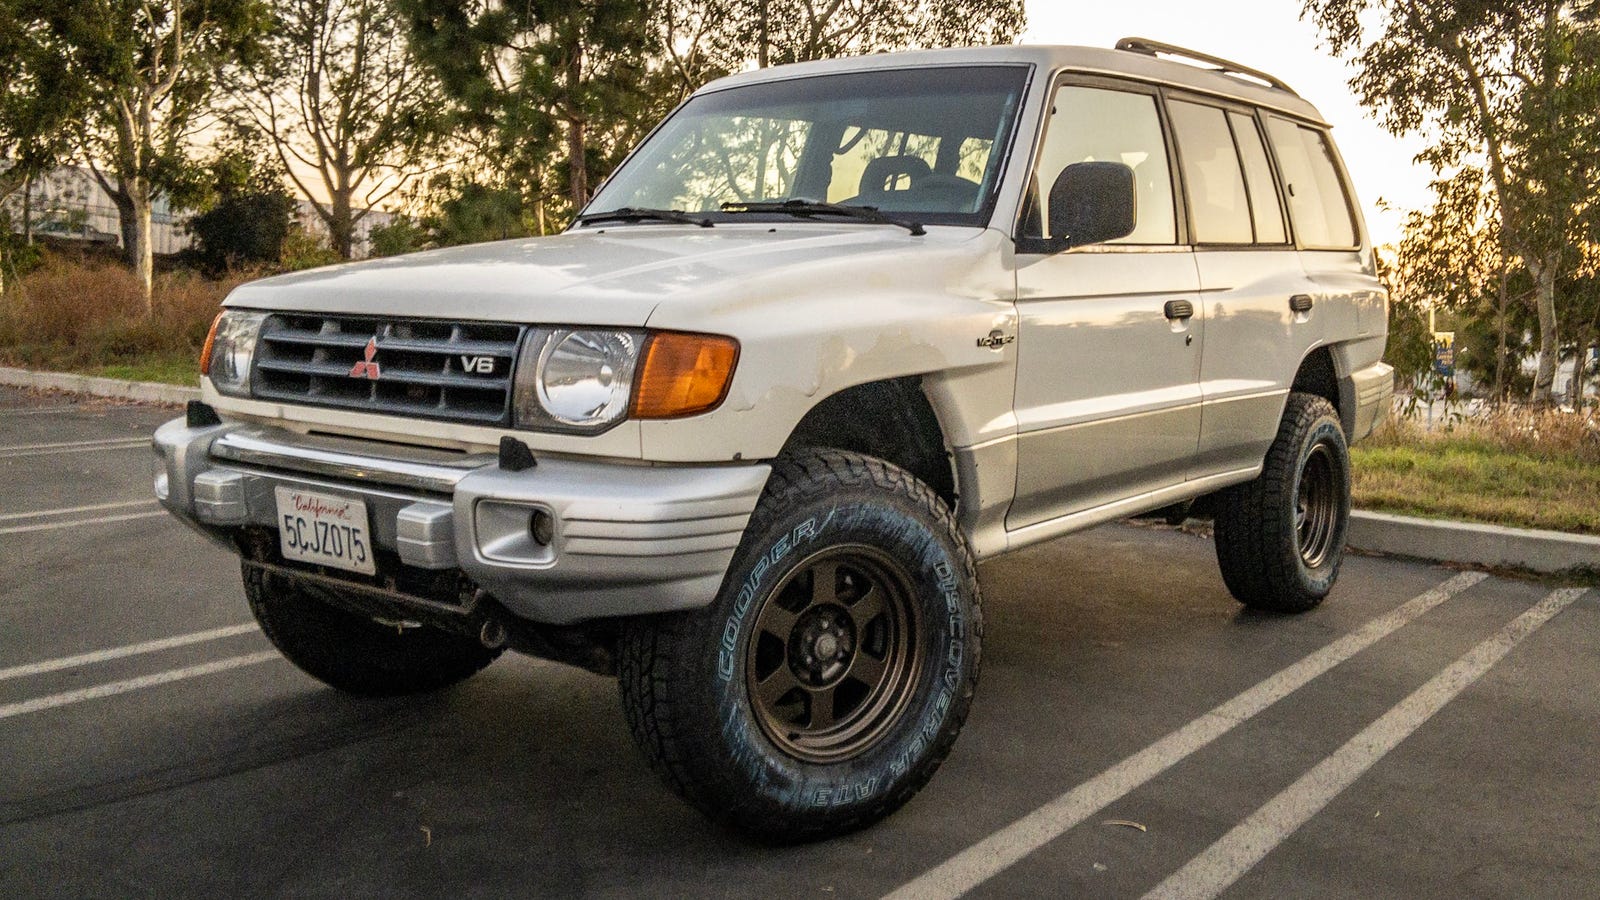 I'm Taking My Budget Overland SUV On A 1,000-Mile Mexican Road Trip